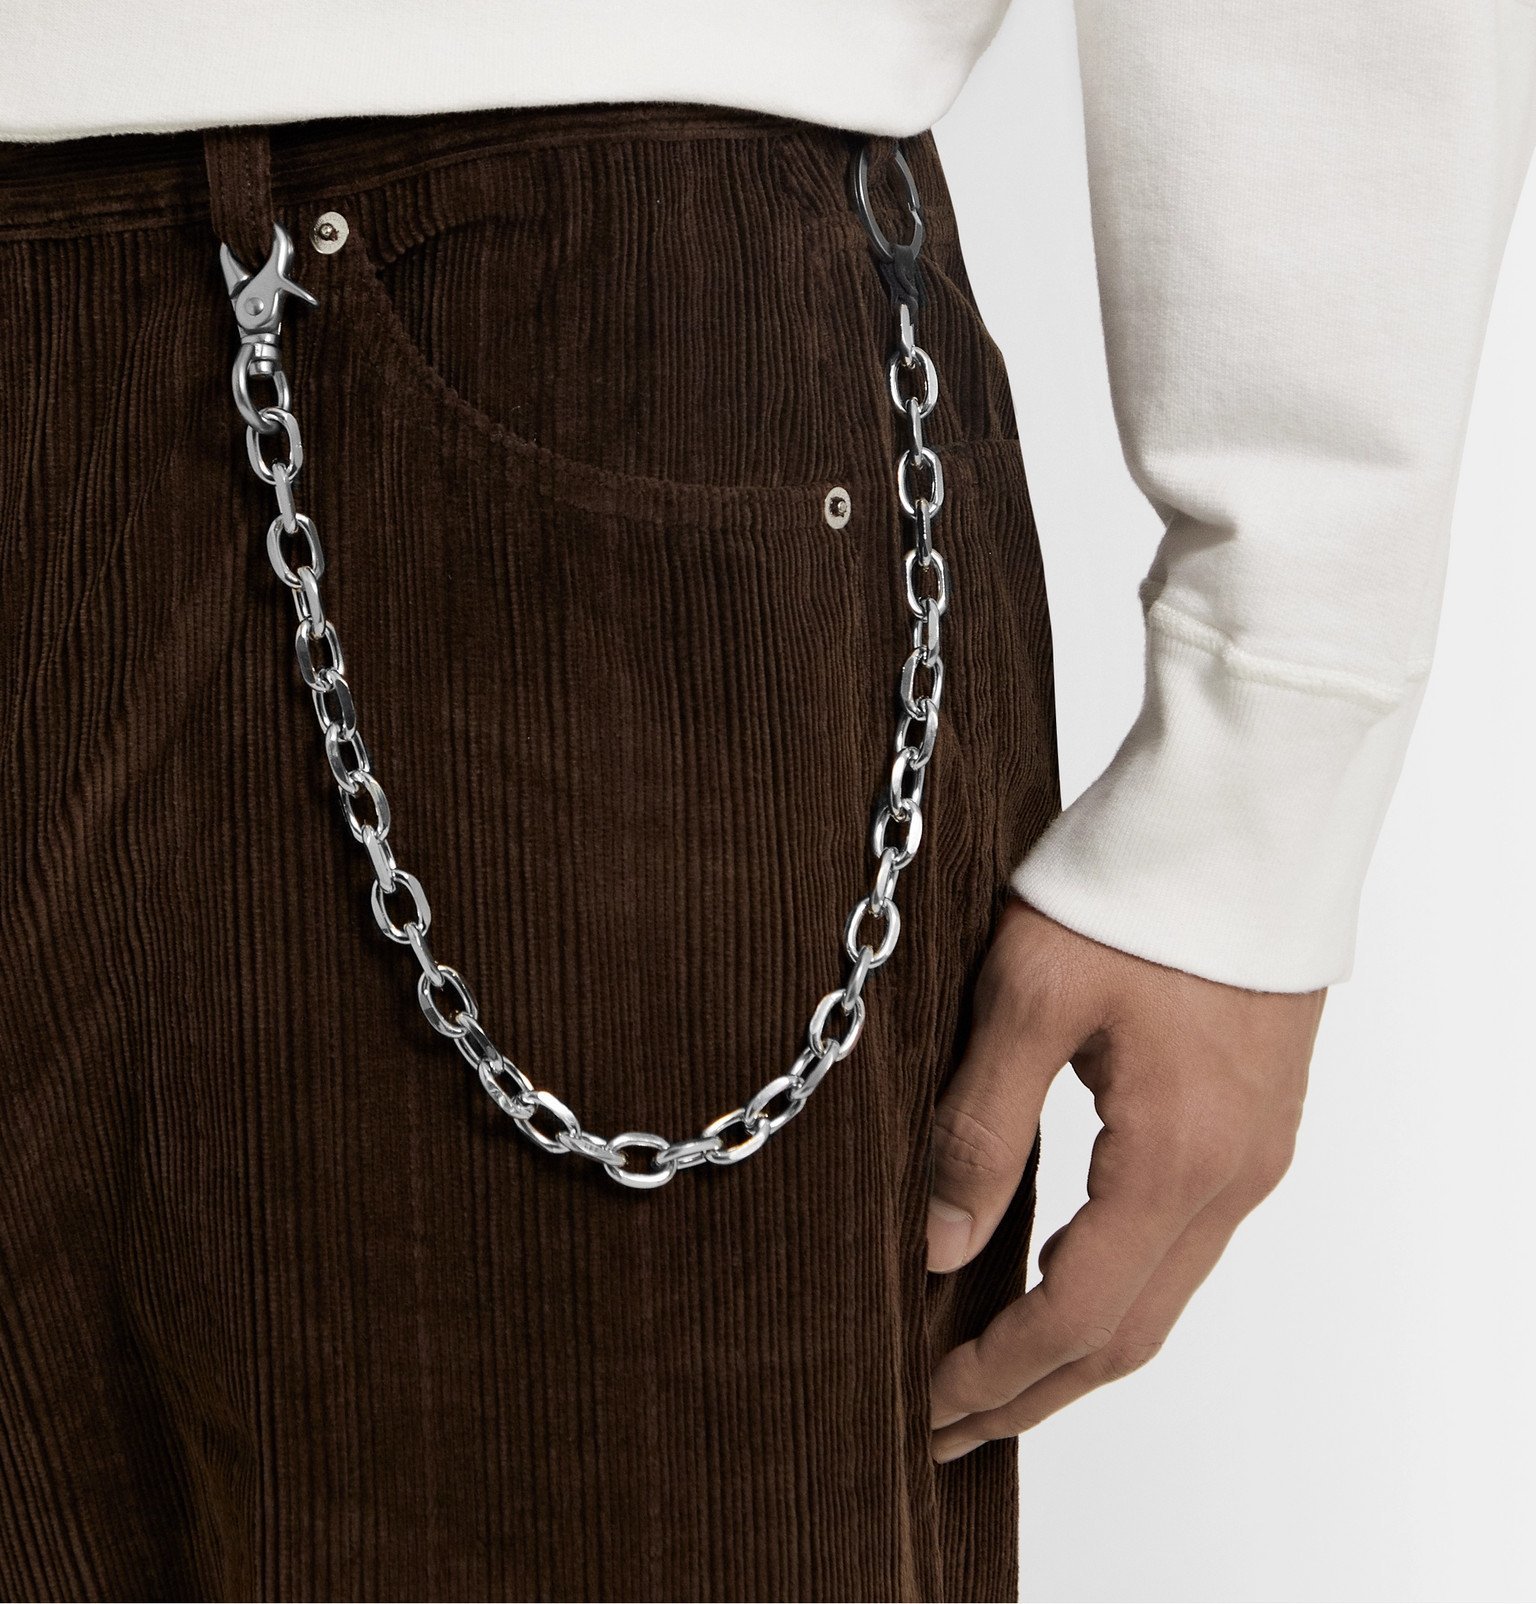 Our Legacy - Ladon Metal Wallet Chain - Silver Our Legacy